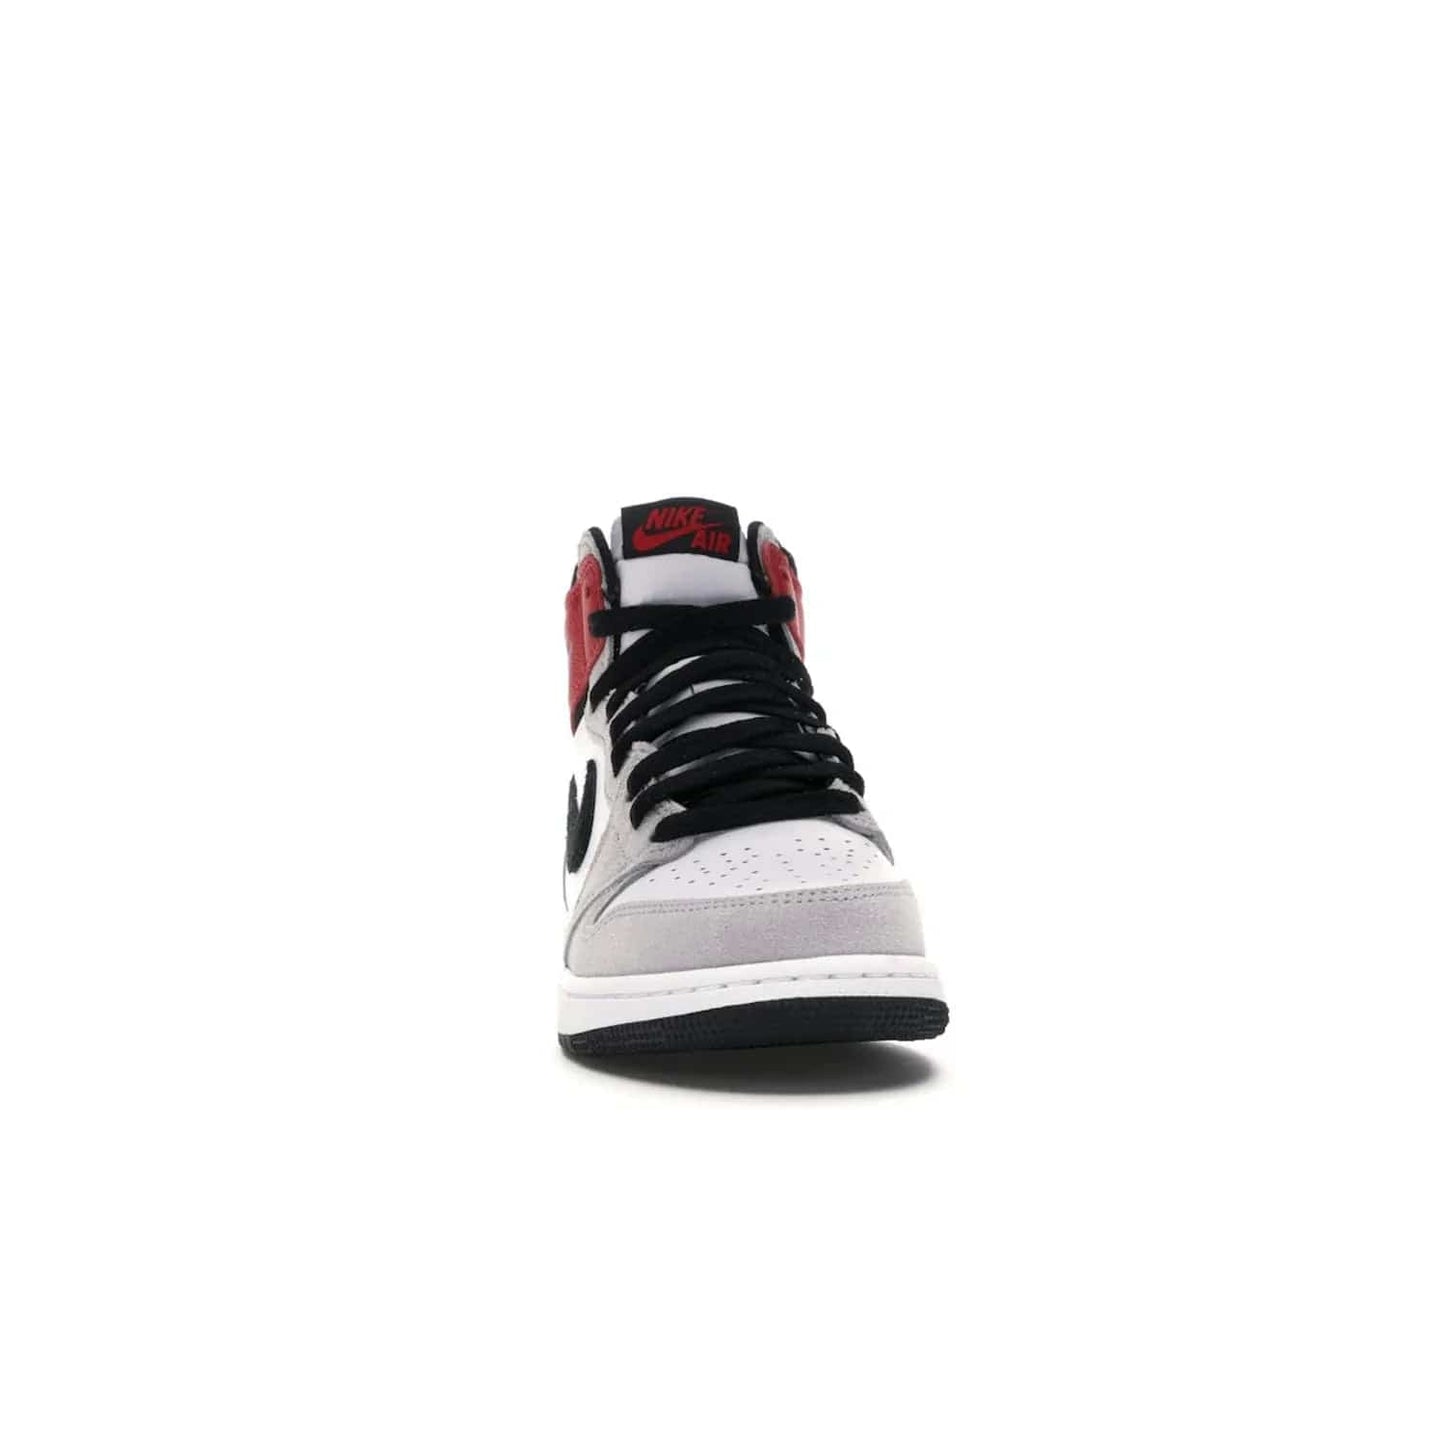 Jordan 1 Retro High Light Smoke Grey (GS) - Image 9 - Only at www.BallersClubKickz.com - Jordan 1 Retro High Light Smoke Grey (GS) features shades of grey, black, and Varsity Red with a bold silhouette. Premium white leather and suede overlays create a unique look. Released July 2020, offering style and performance. Perfect sneaker for any collector or fan.